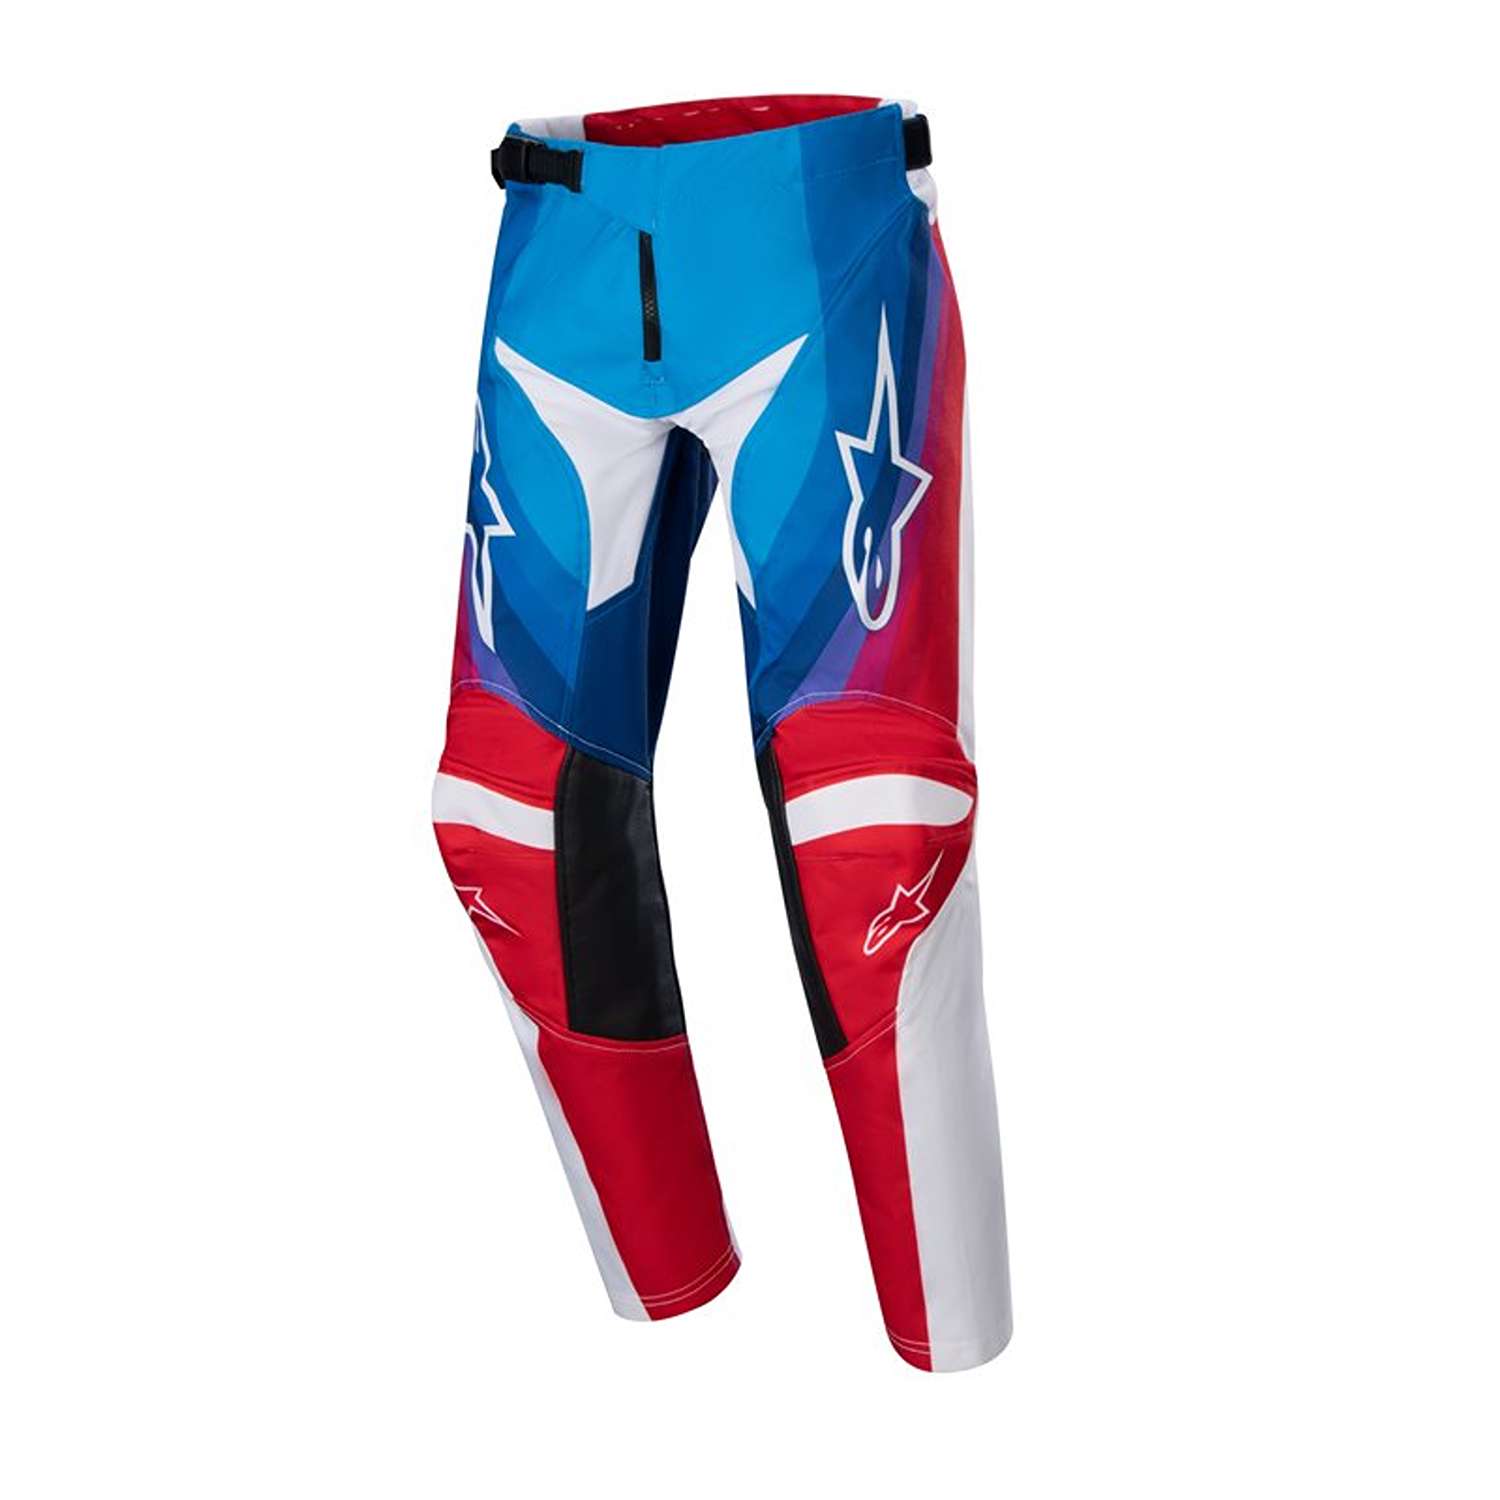 Image of EU Alpinestars Youth Racer Pneuma Pants Blue Mars Red White Taille 26